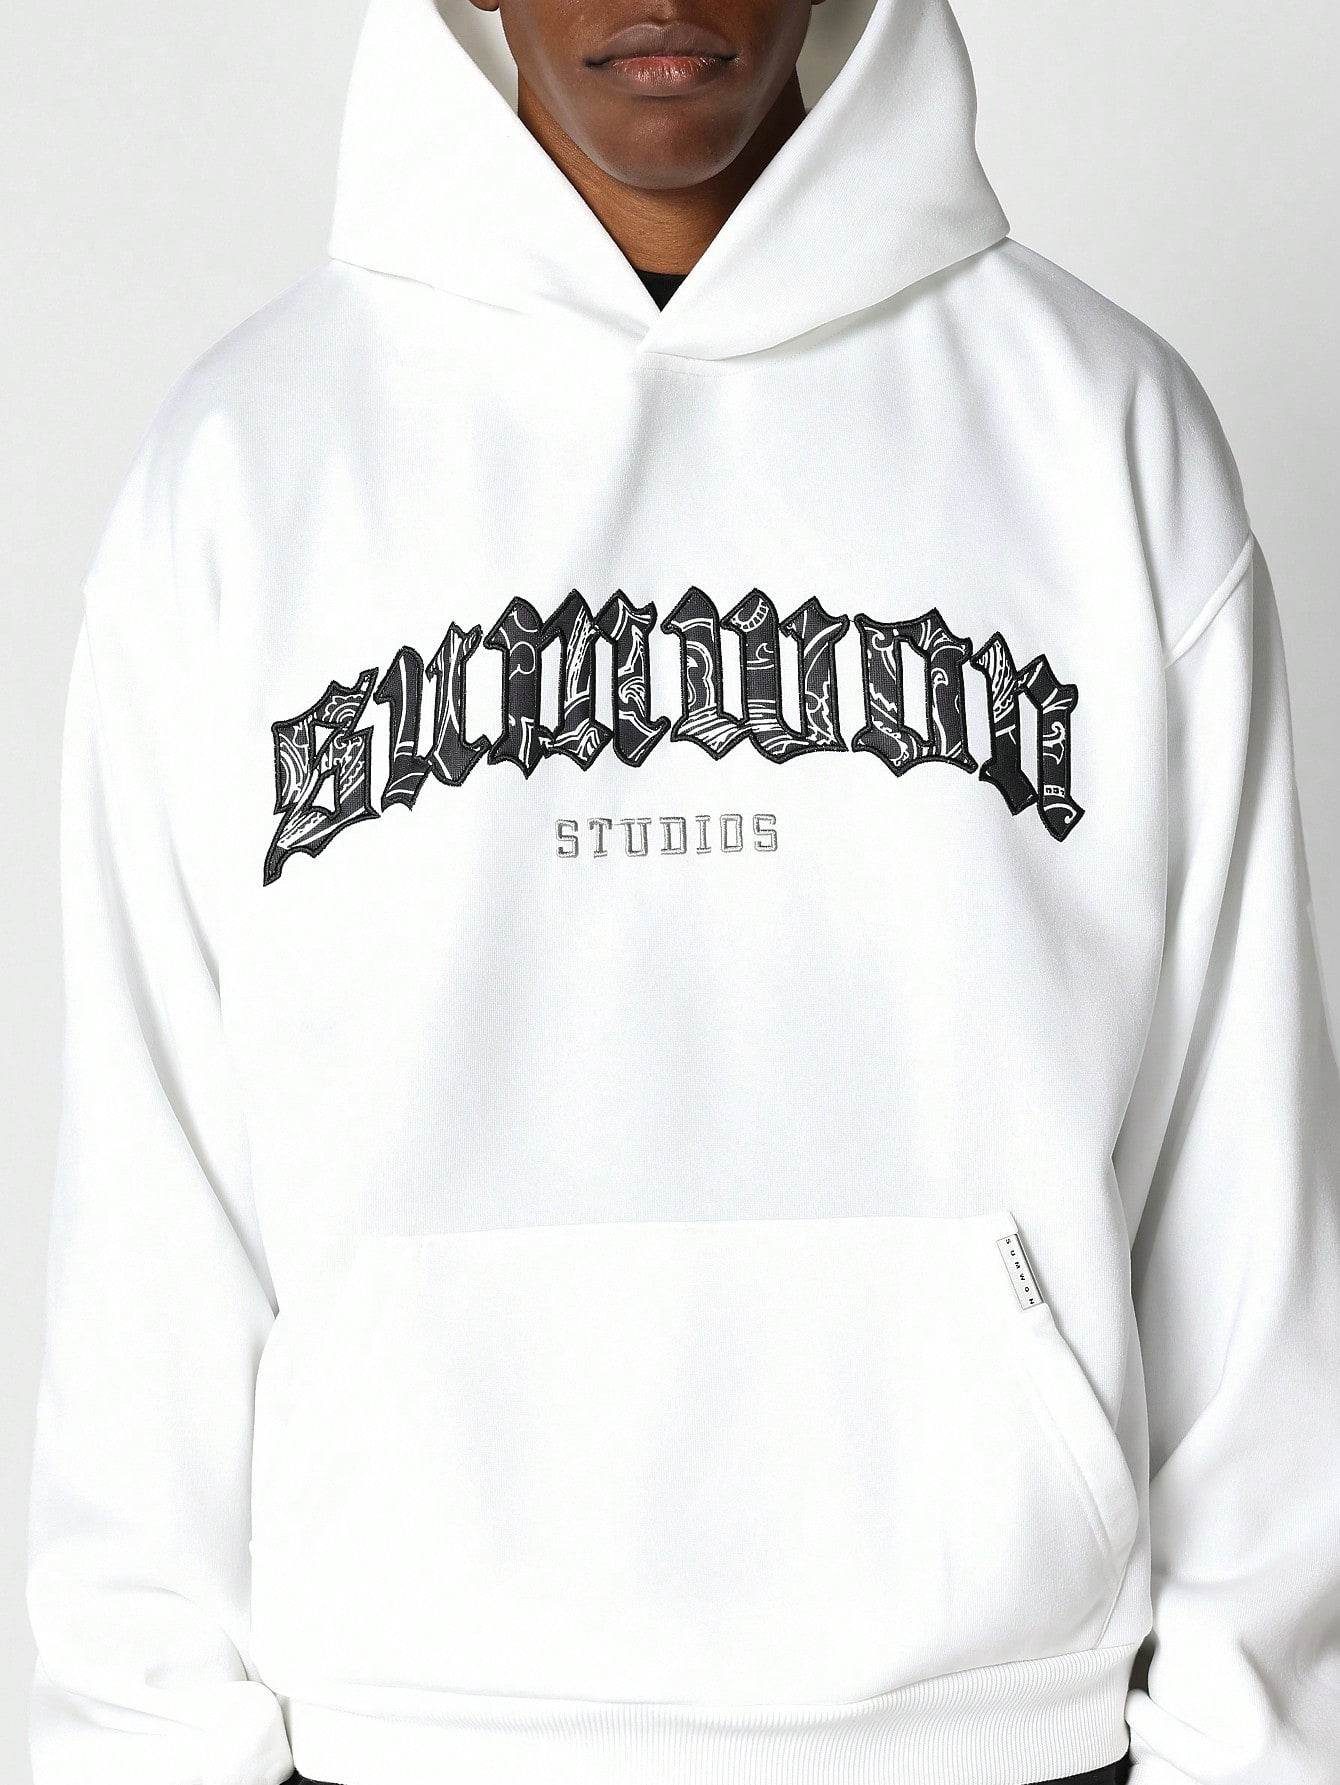 Overhead Hoodie With Applique